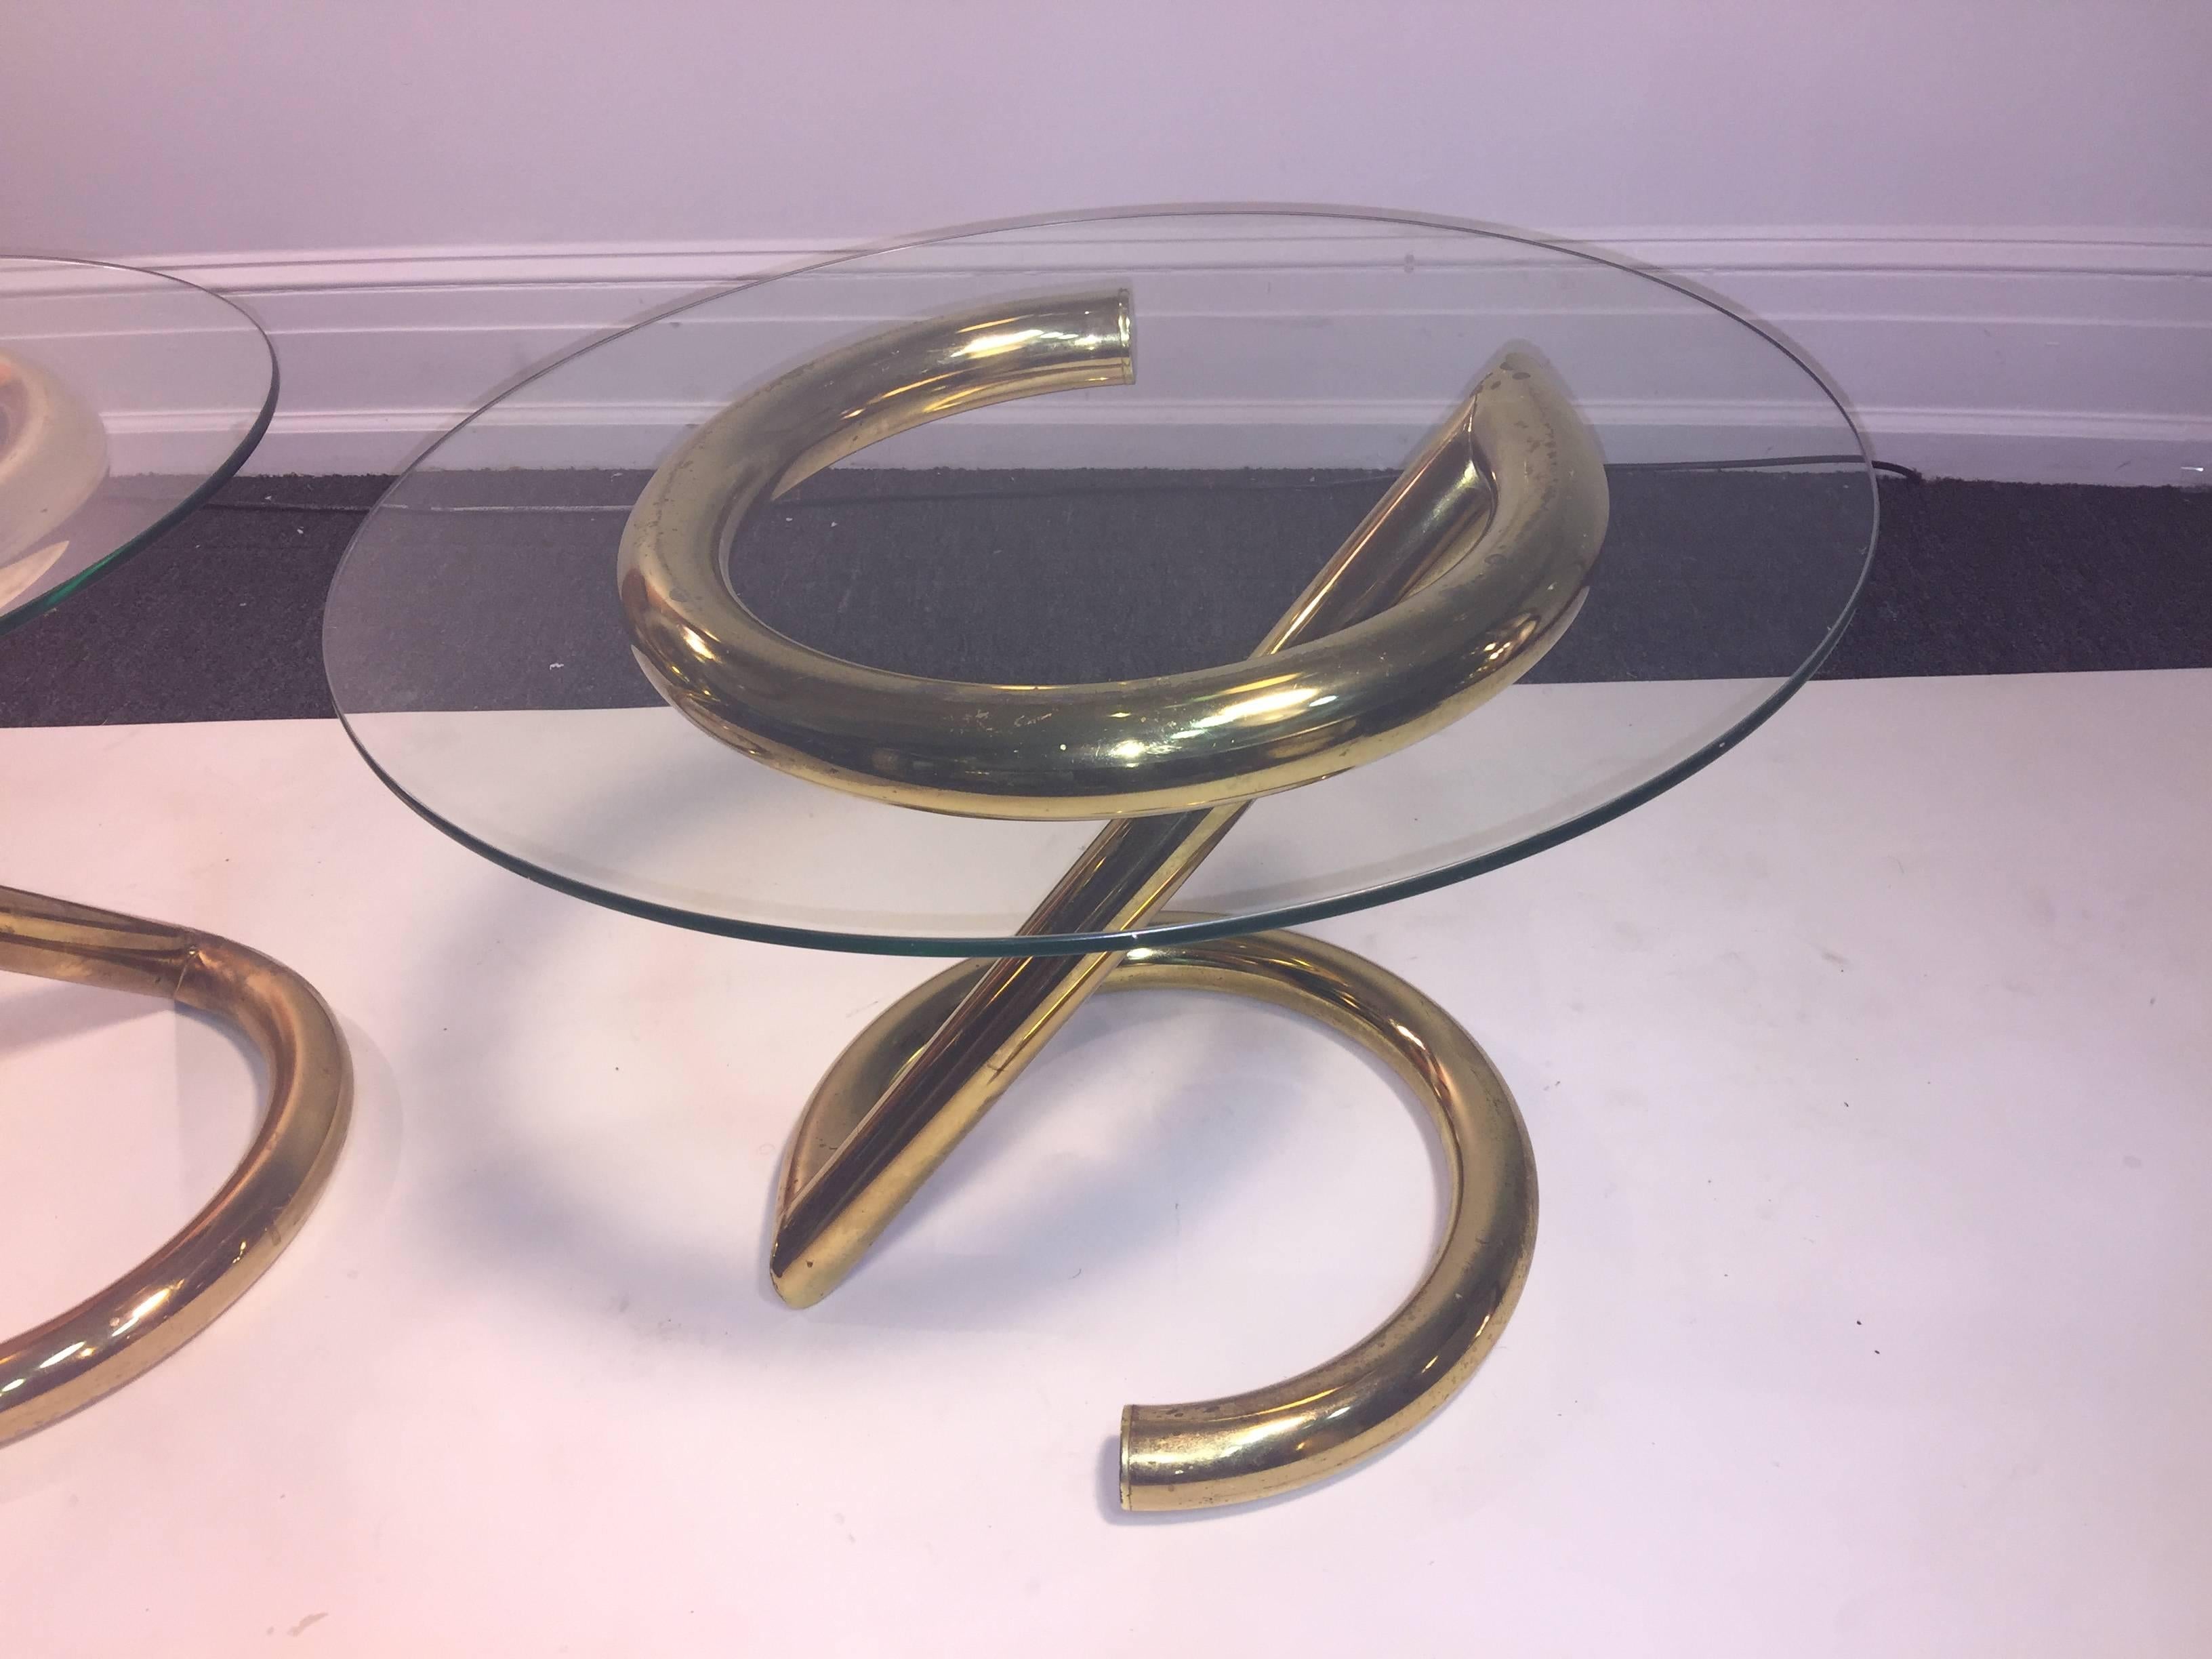 Modernist Pair of Polished Goldtone Metal Tables With Tubular Modern Design Bases and round glass tops.